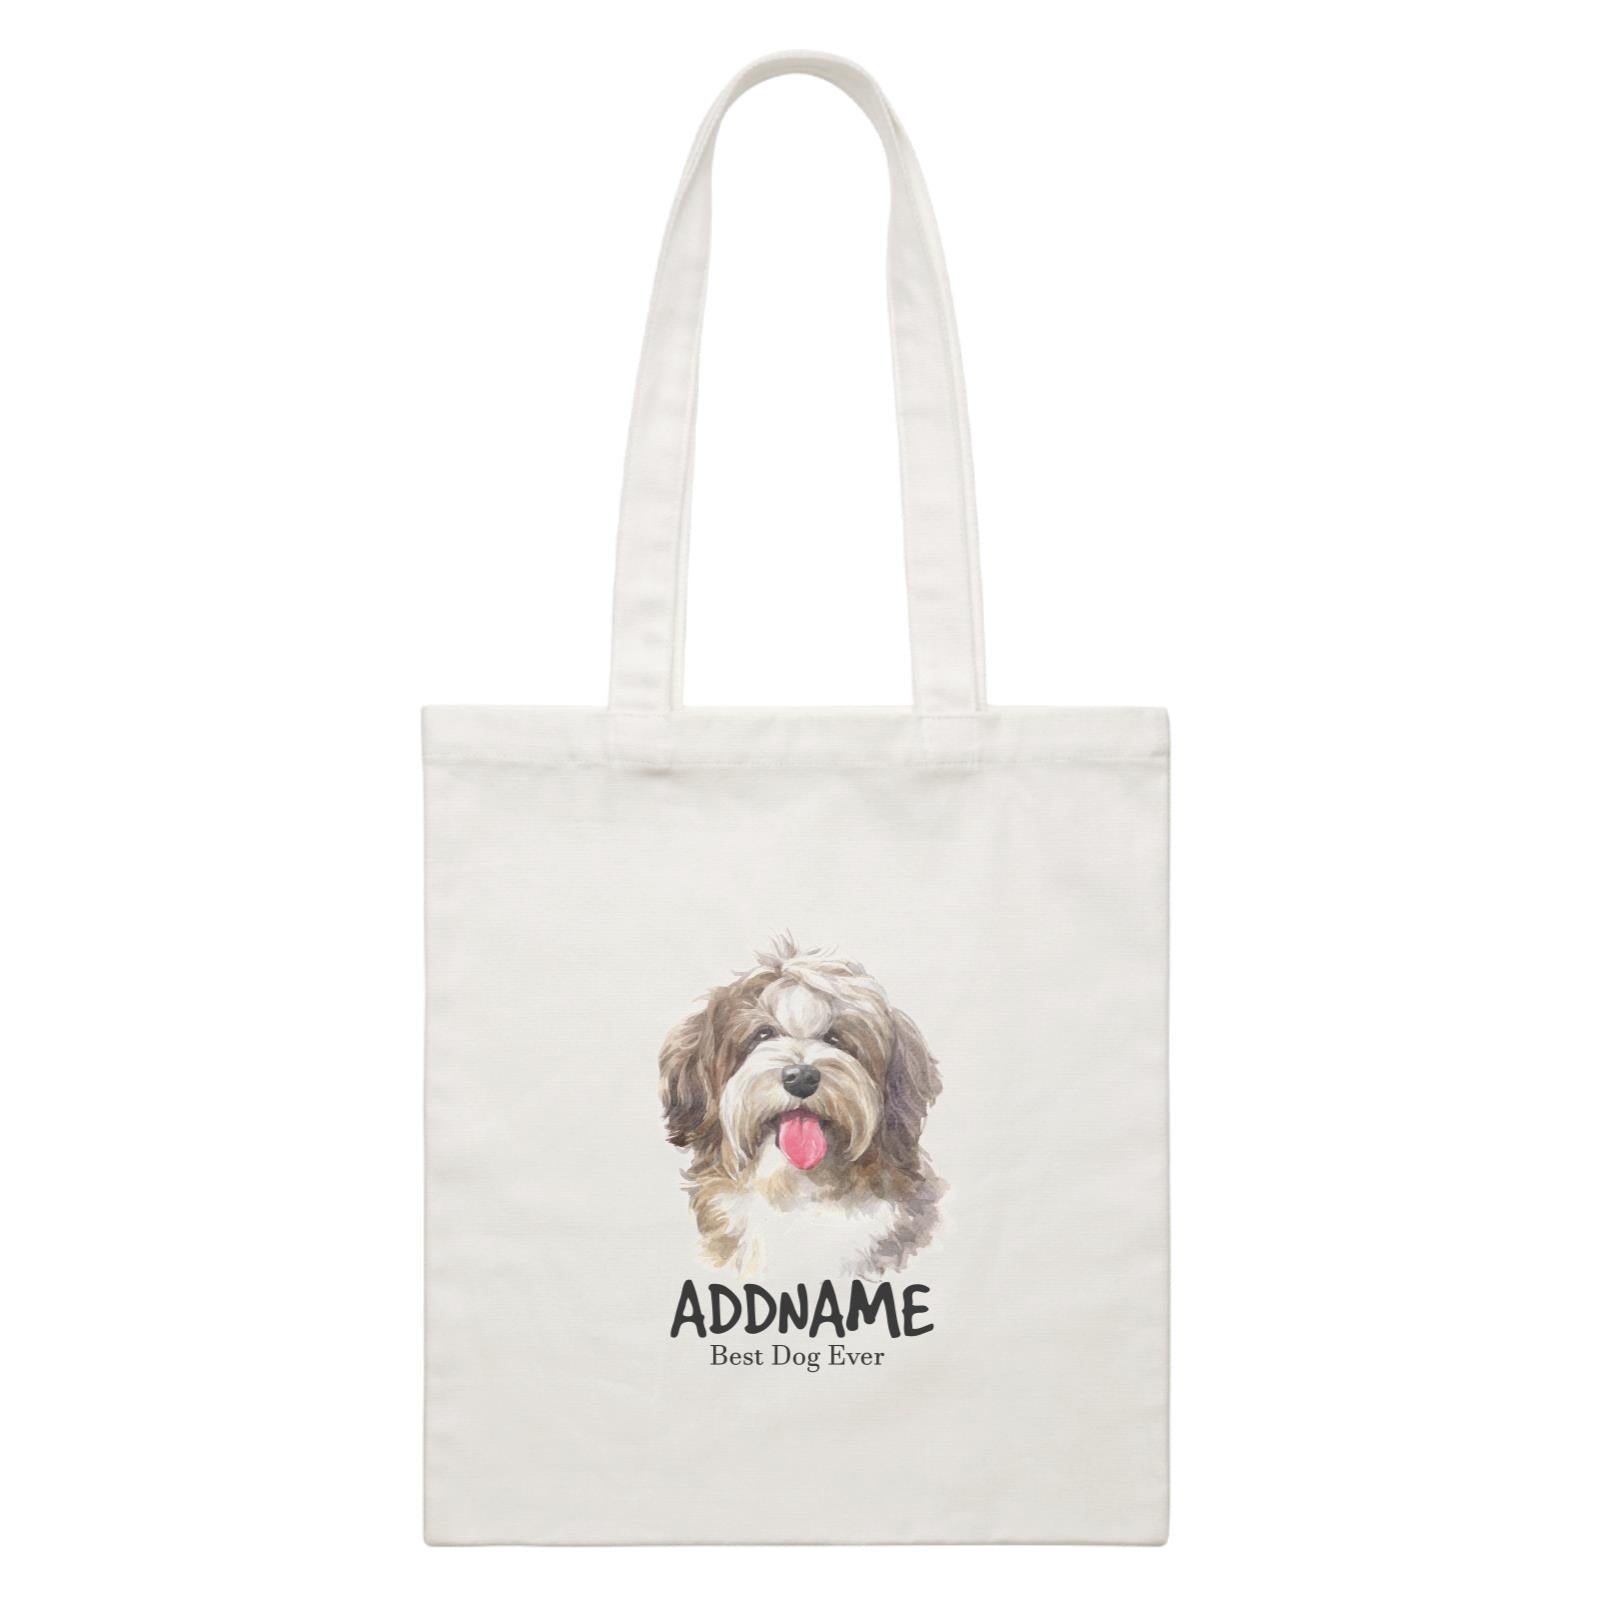 Watercolor Dog Shaggy Havanese Best Dog Ever Addname White Canvas Bag